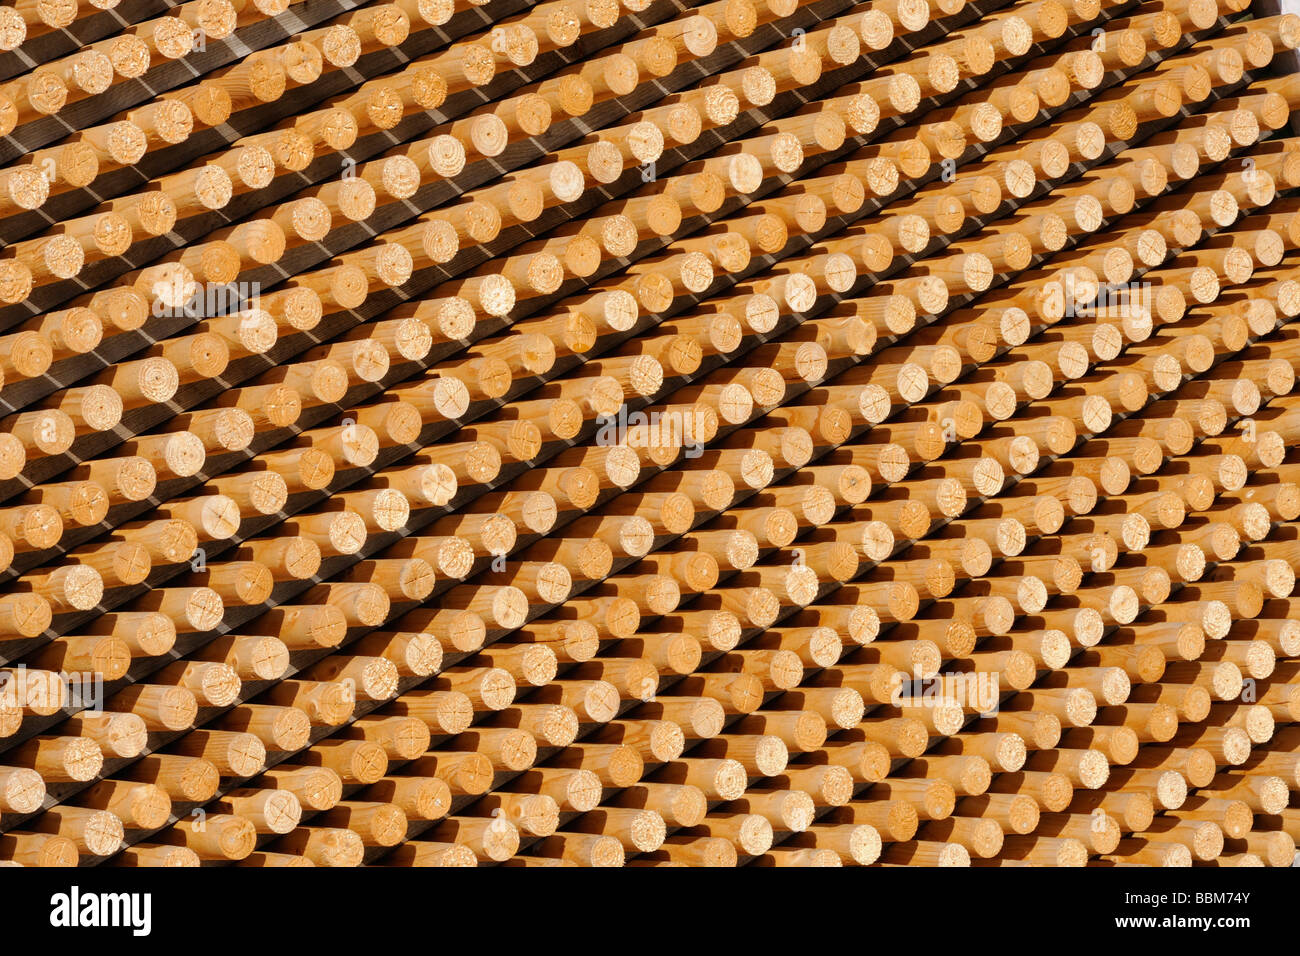 Rungs, roundwood, wood stack, wooden staffs Stock Photo